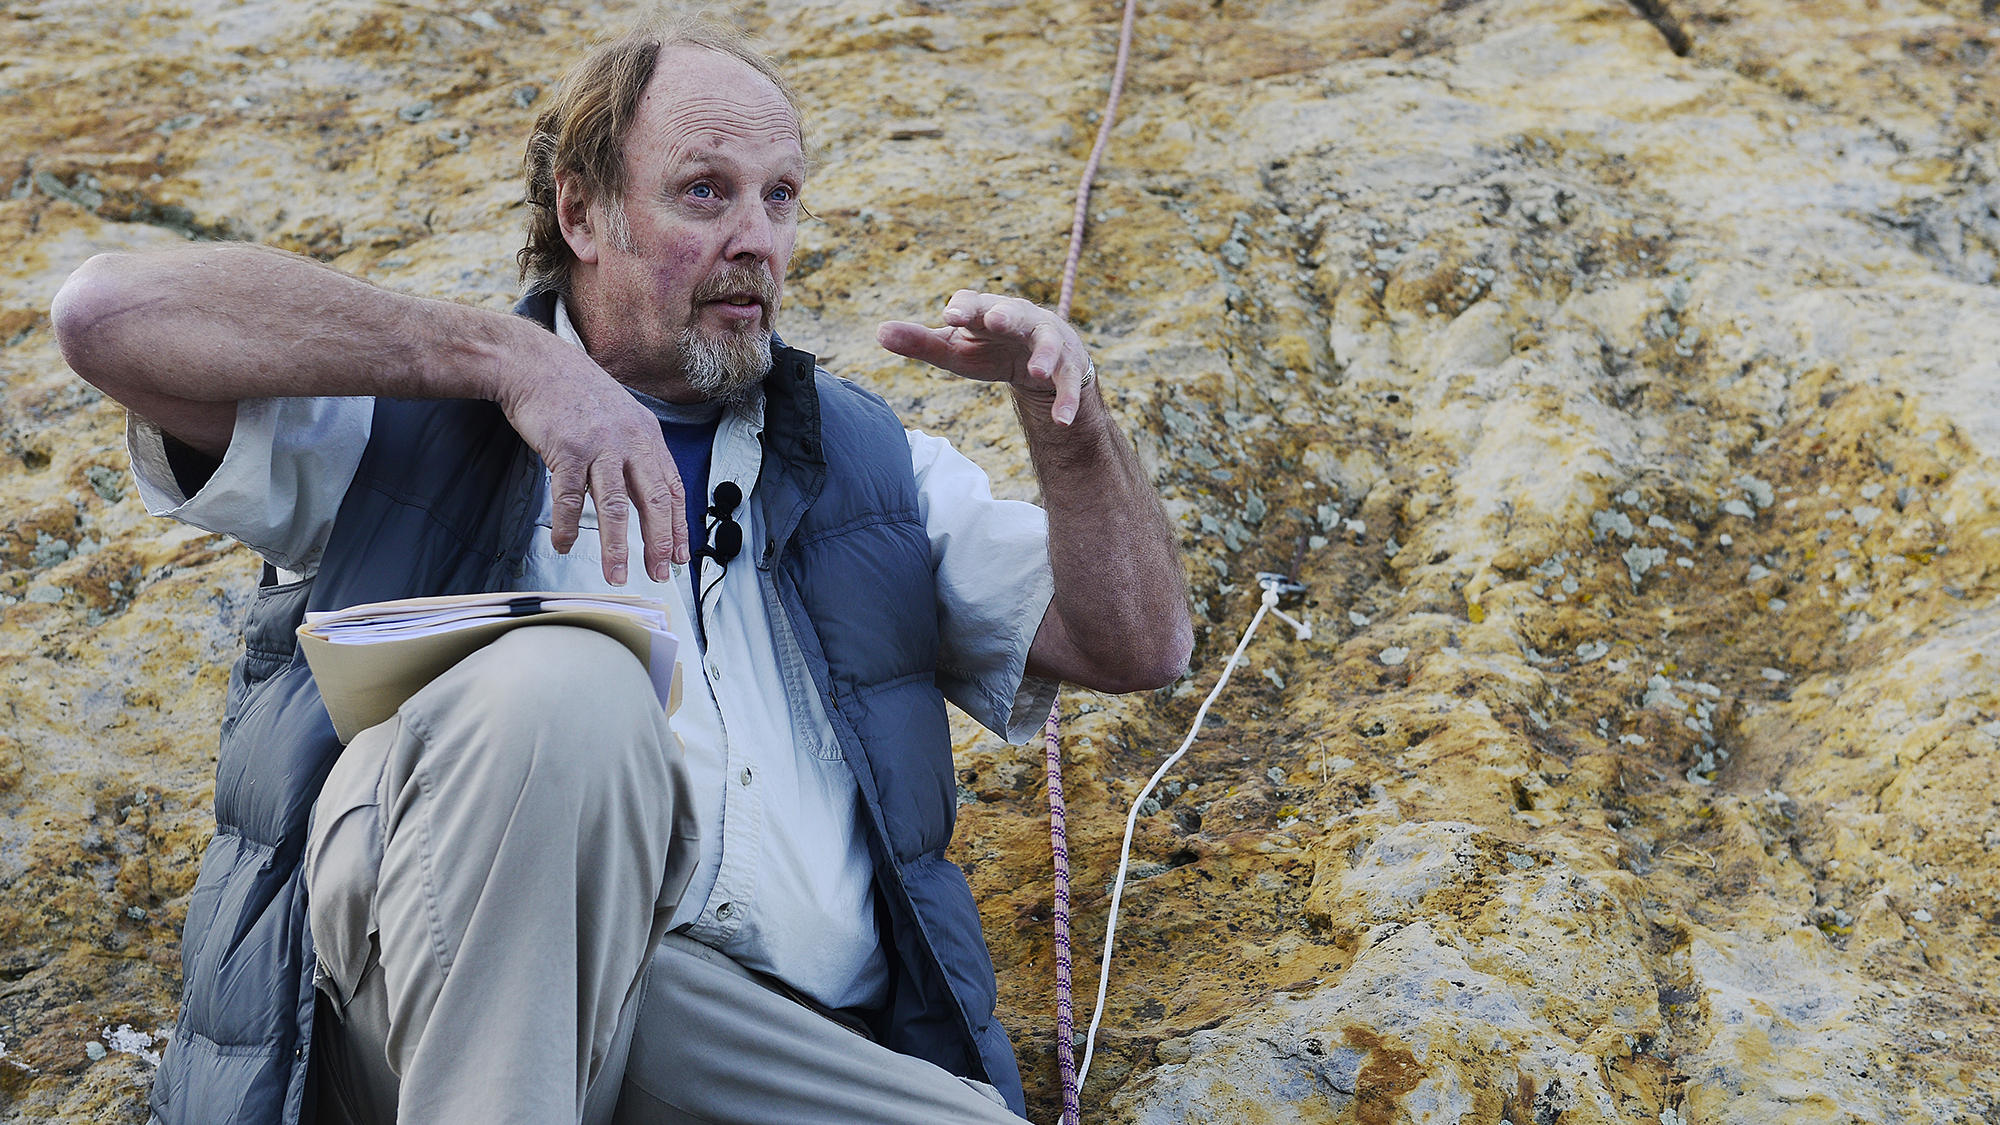 Paleontologist Martin Lockley sits in front of a rock with dinosaur claw marks and shows how dinosaurs must have clawed into the rock during a mating ceremony where they made pseudo nests for potential mates.